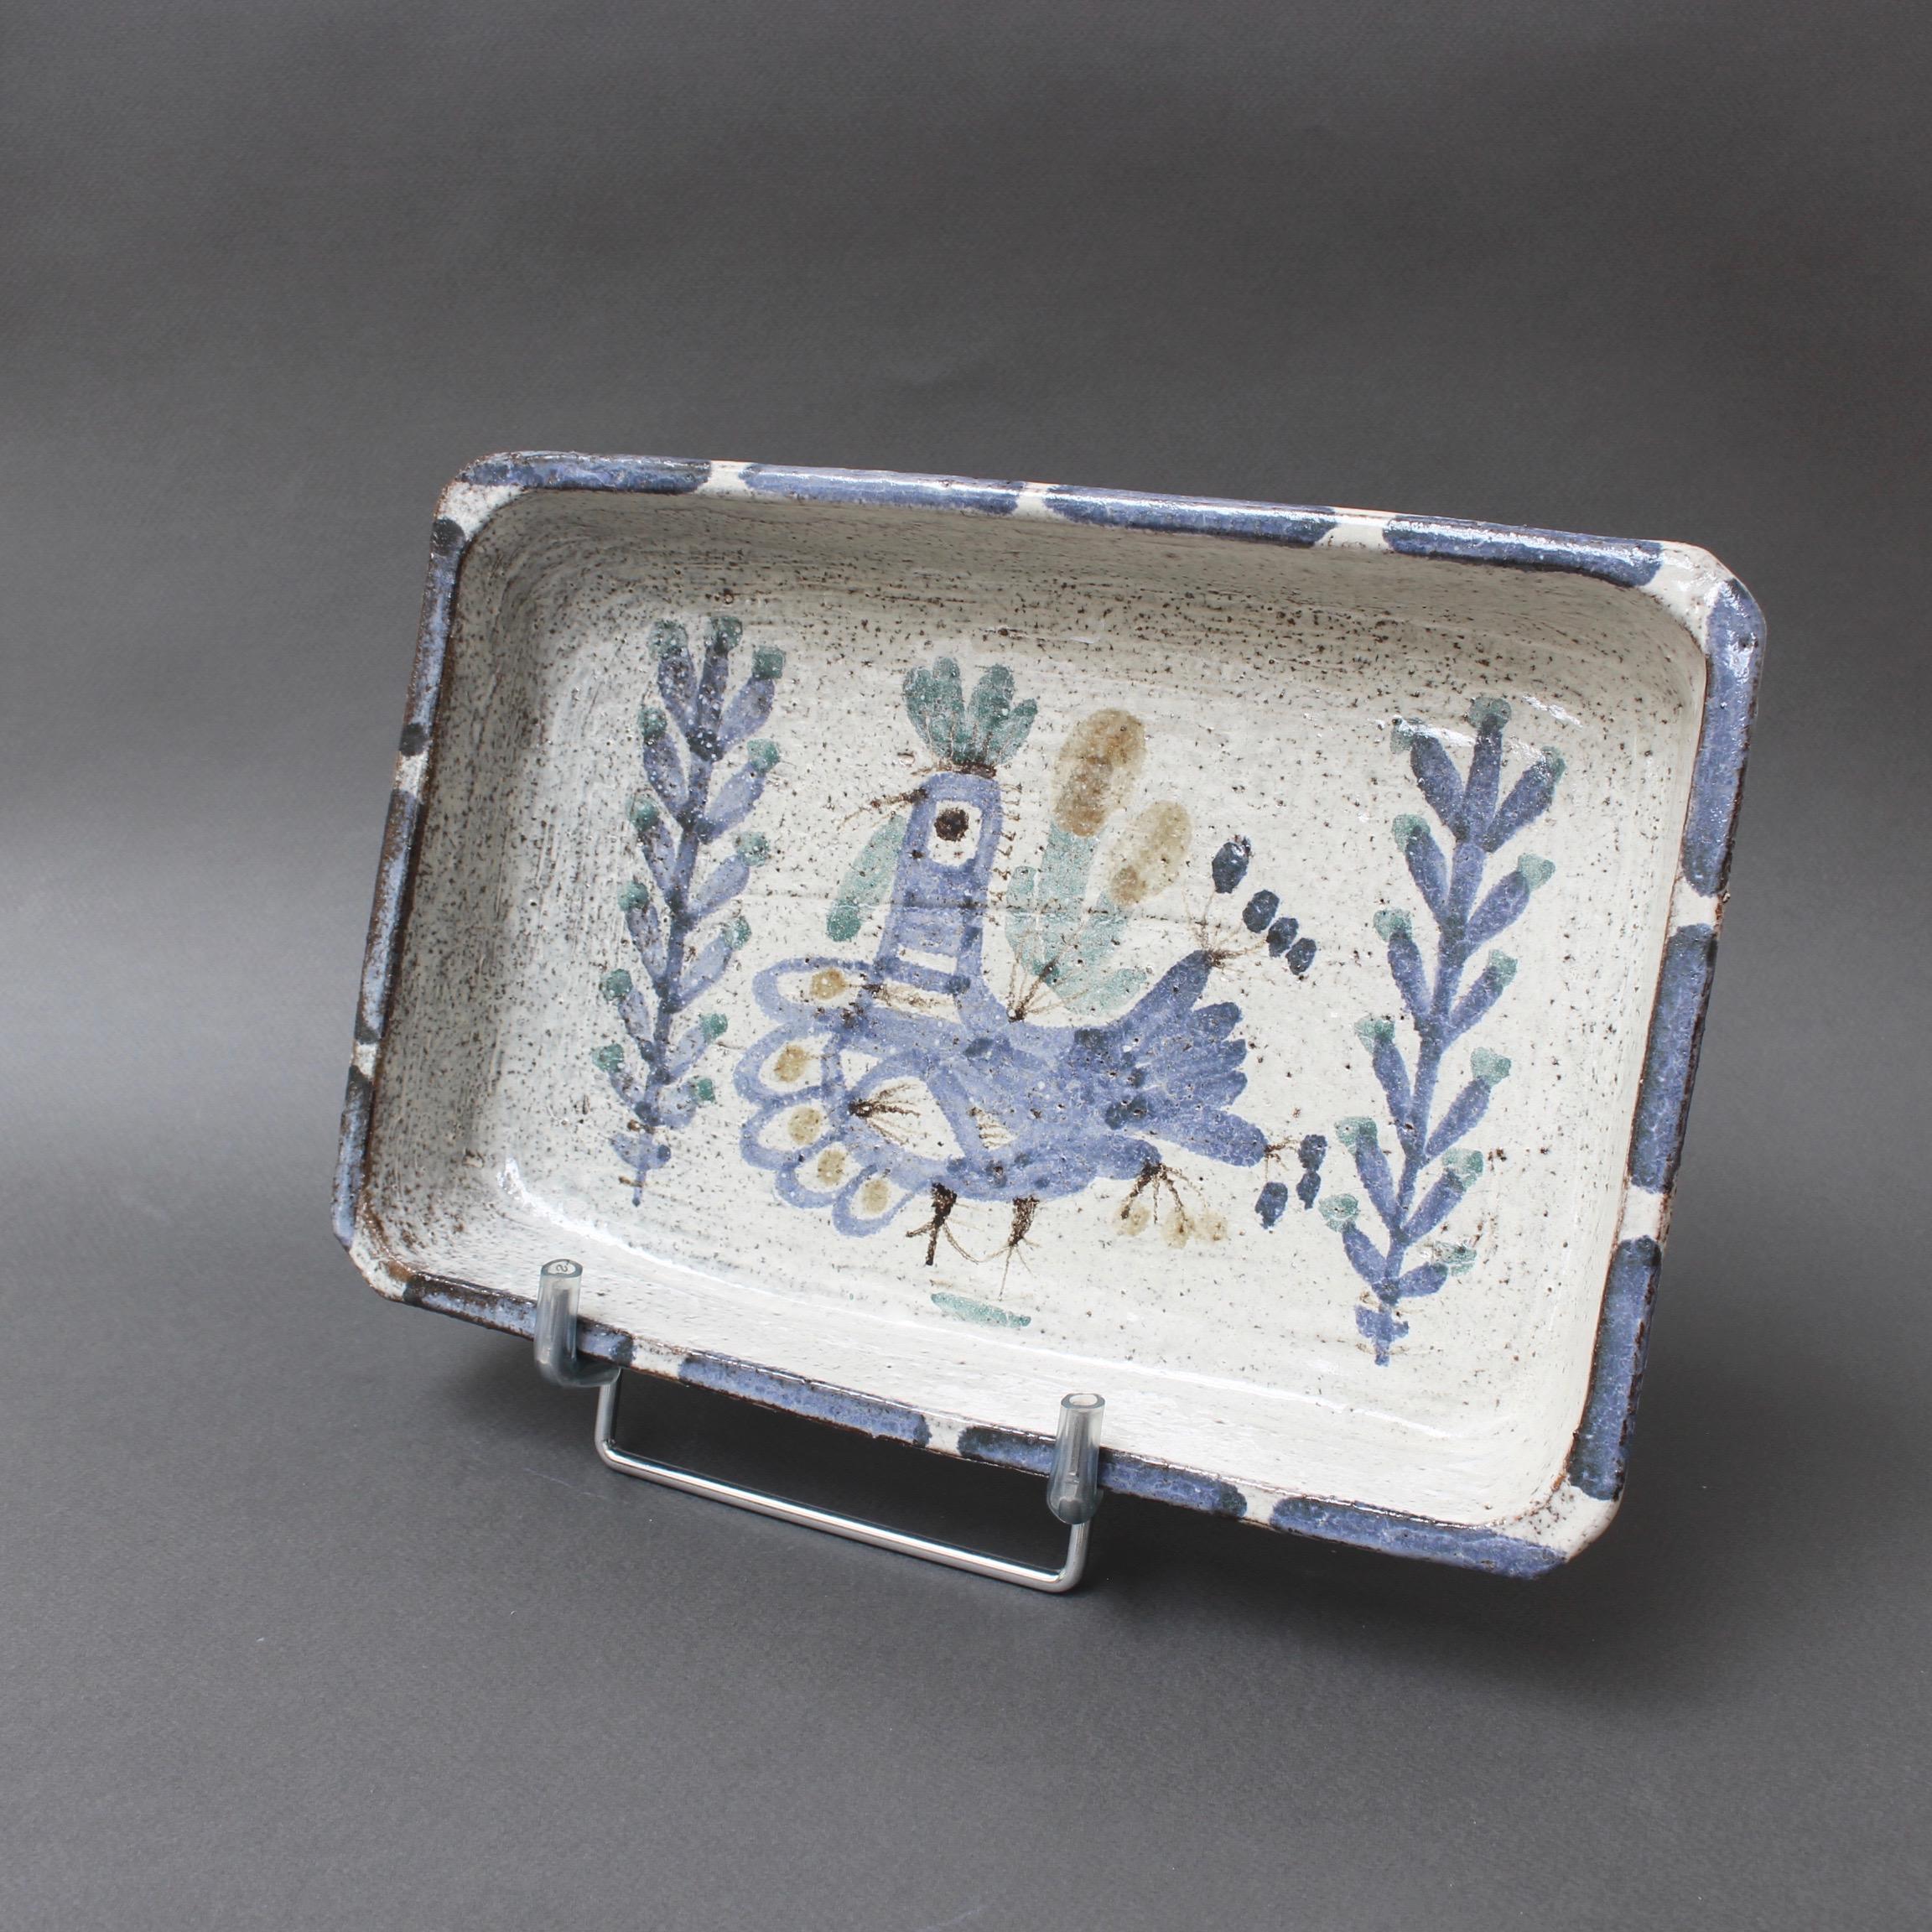 Decorative ceramic rectangular dish by Gustave Reynaud, Le Mûrier, (circa 1950s). This utilitarian crockery dish is also a delightful work of art. On the rustic base is a stylized, French rooster flanked by plant motifs framed in Reynaud's